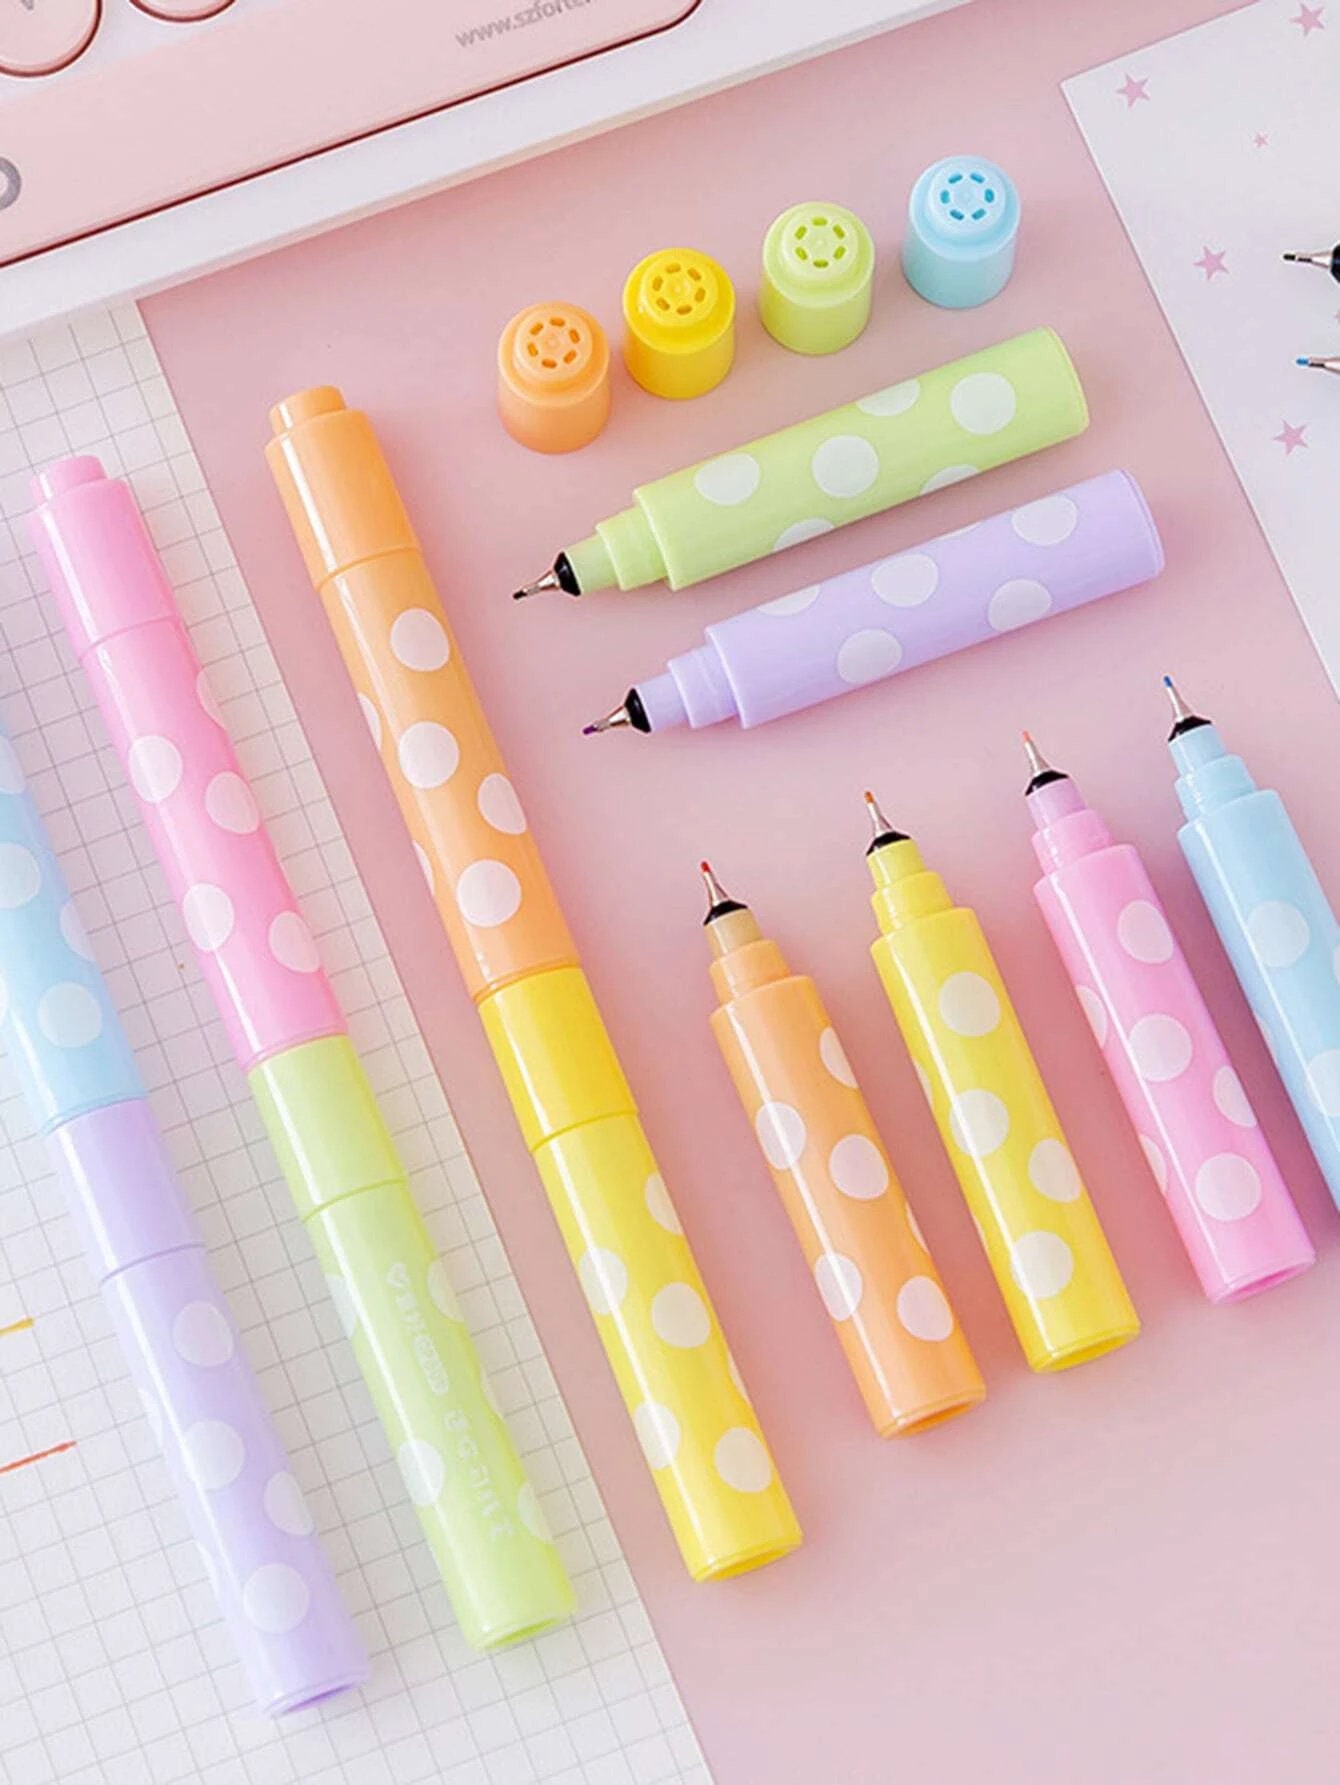 Ultimate Stationery Dot Markers, Dot Markers for Kuwait